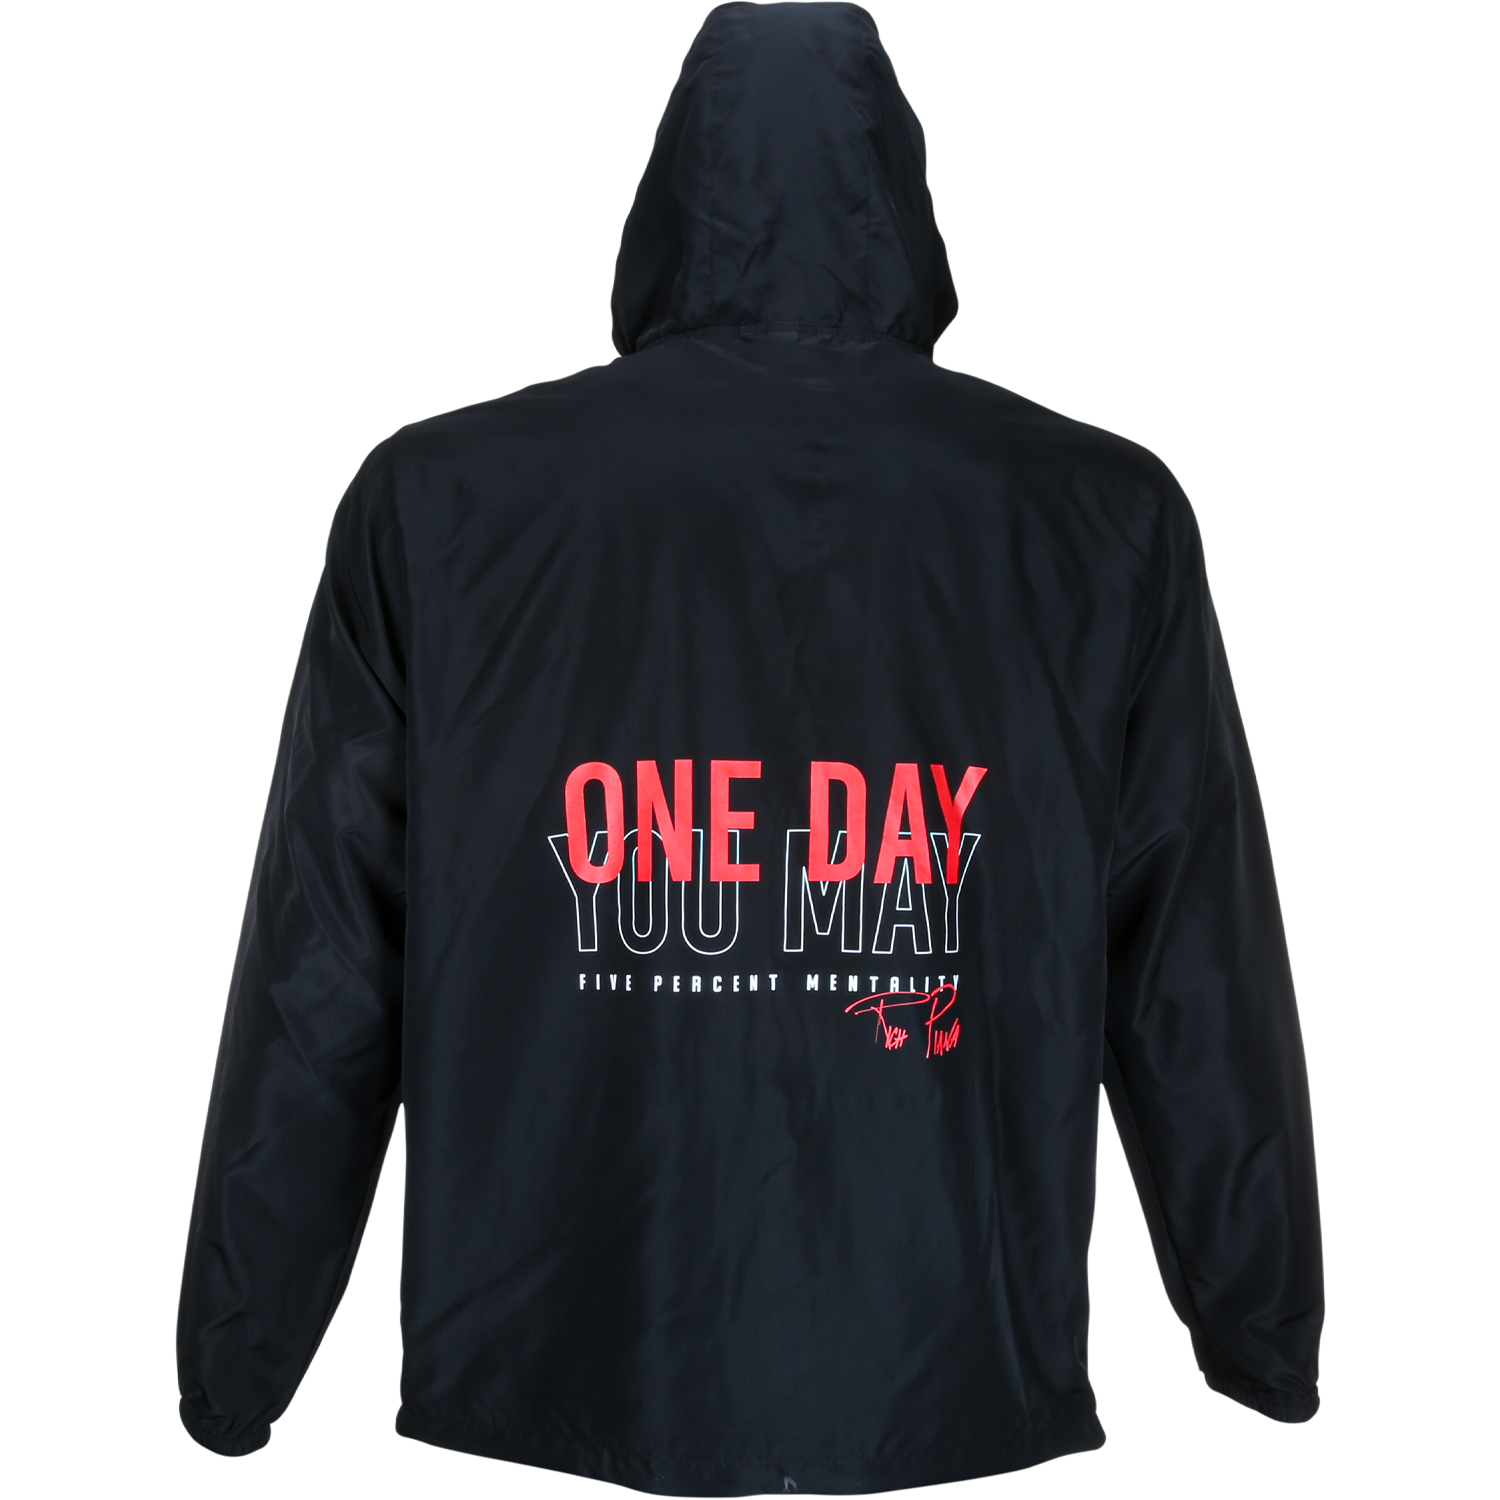 One Day You May Windbreaker (Black) - 5% Nutrition